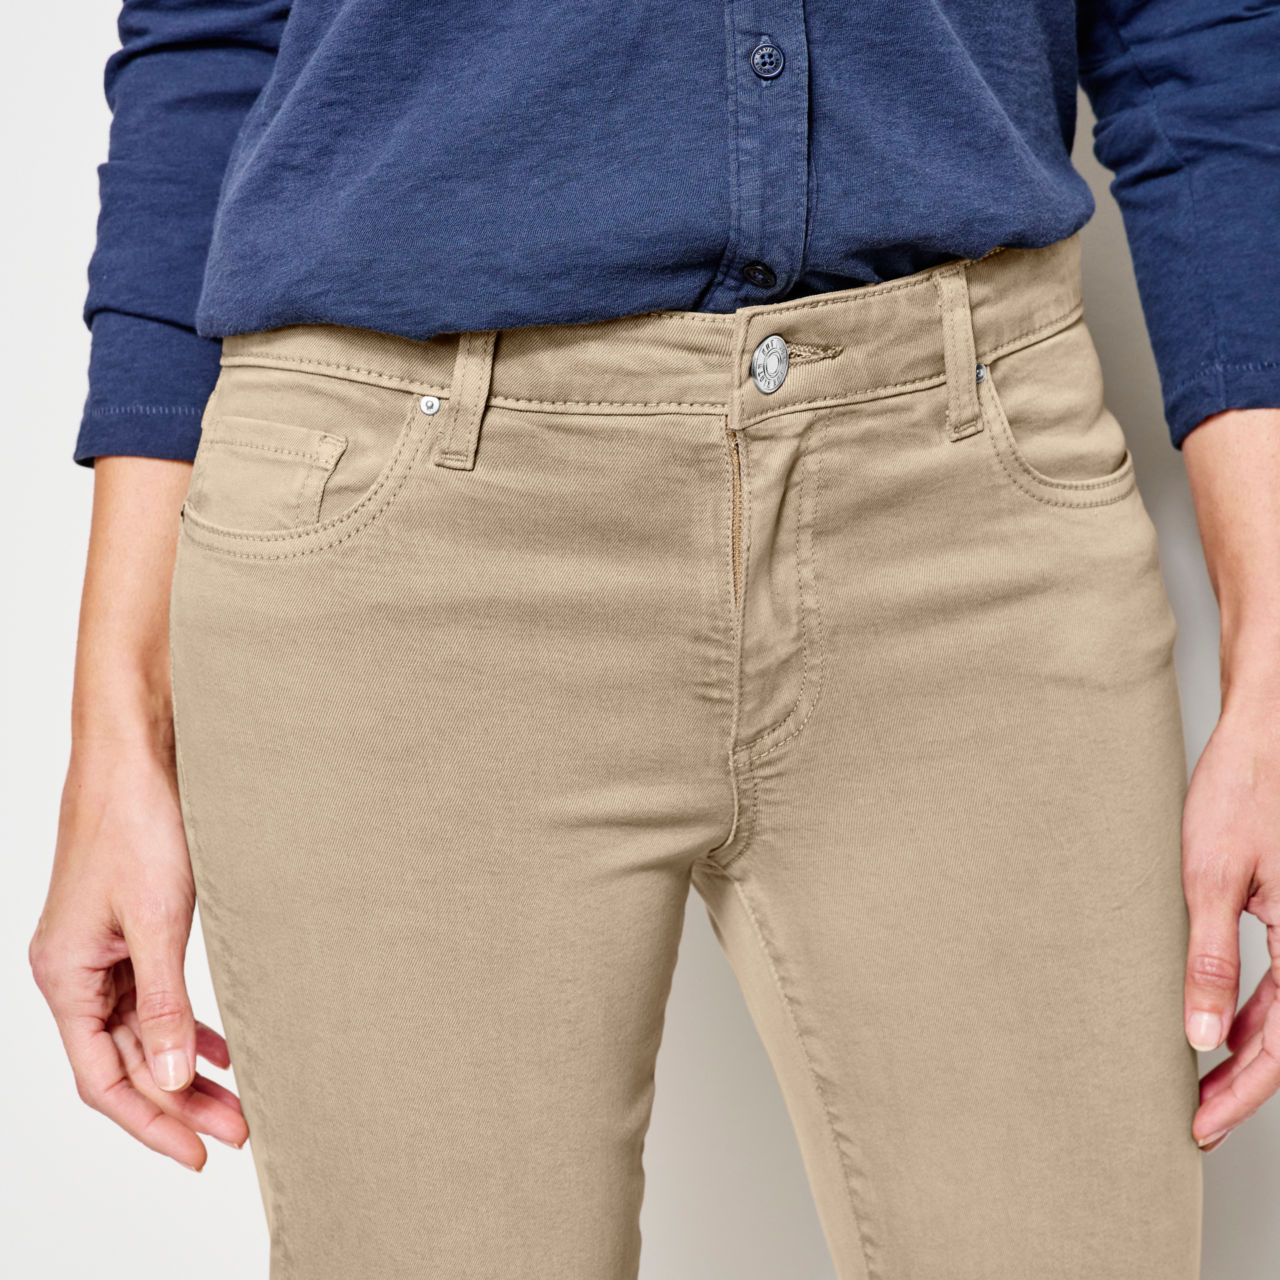 Kut from the Kloth® Stretch Twill Amy Crop - DESERT KHAKI EXCLUSIVE image number 5